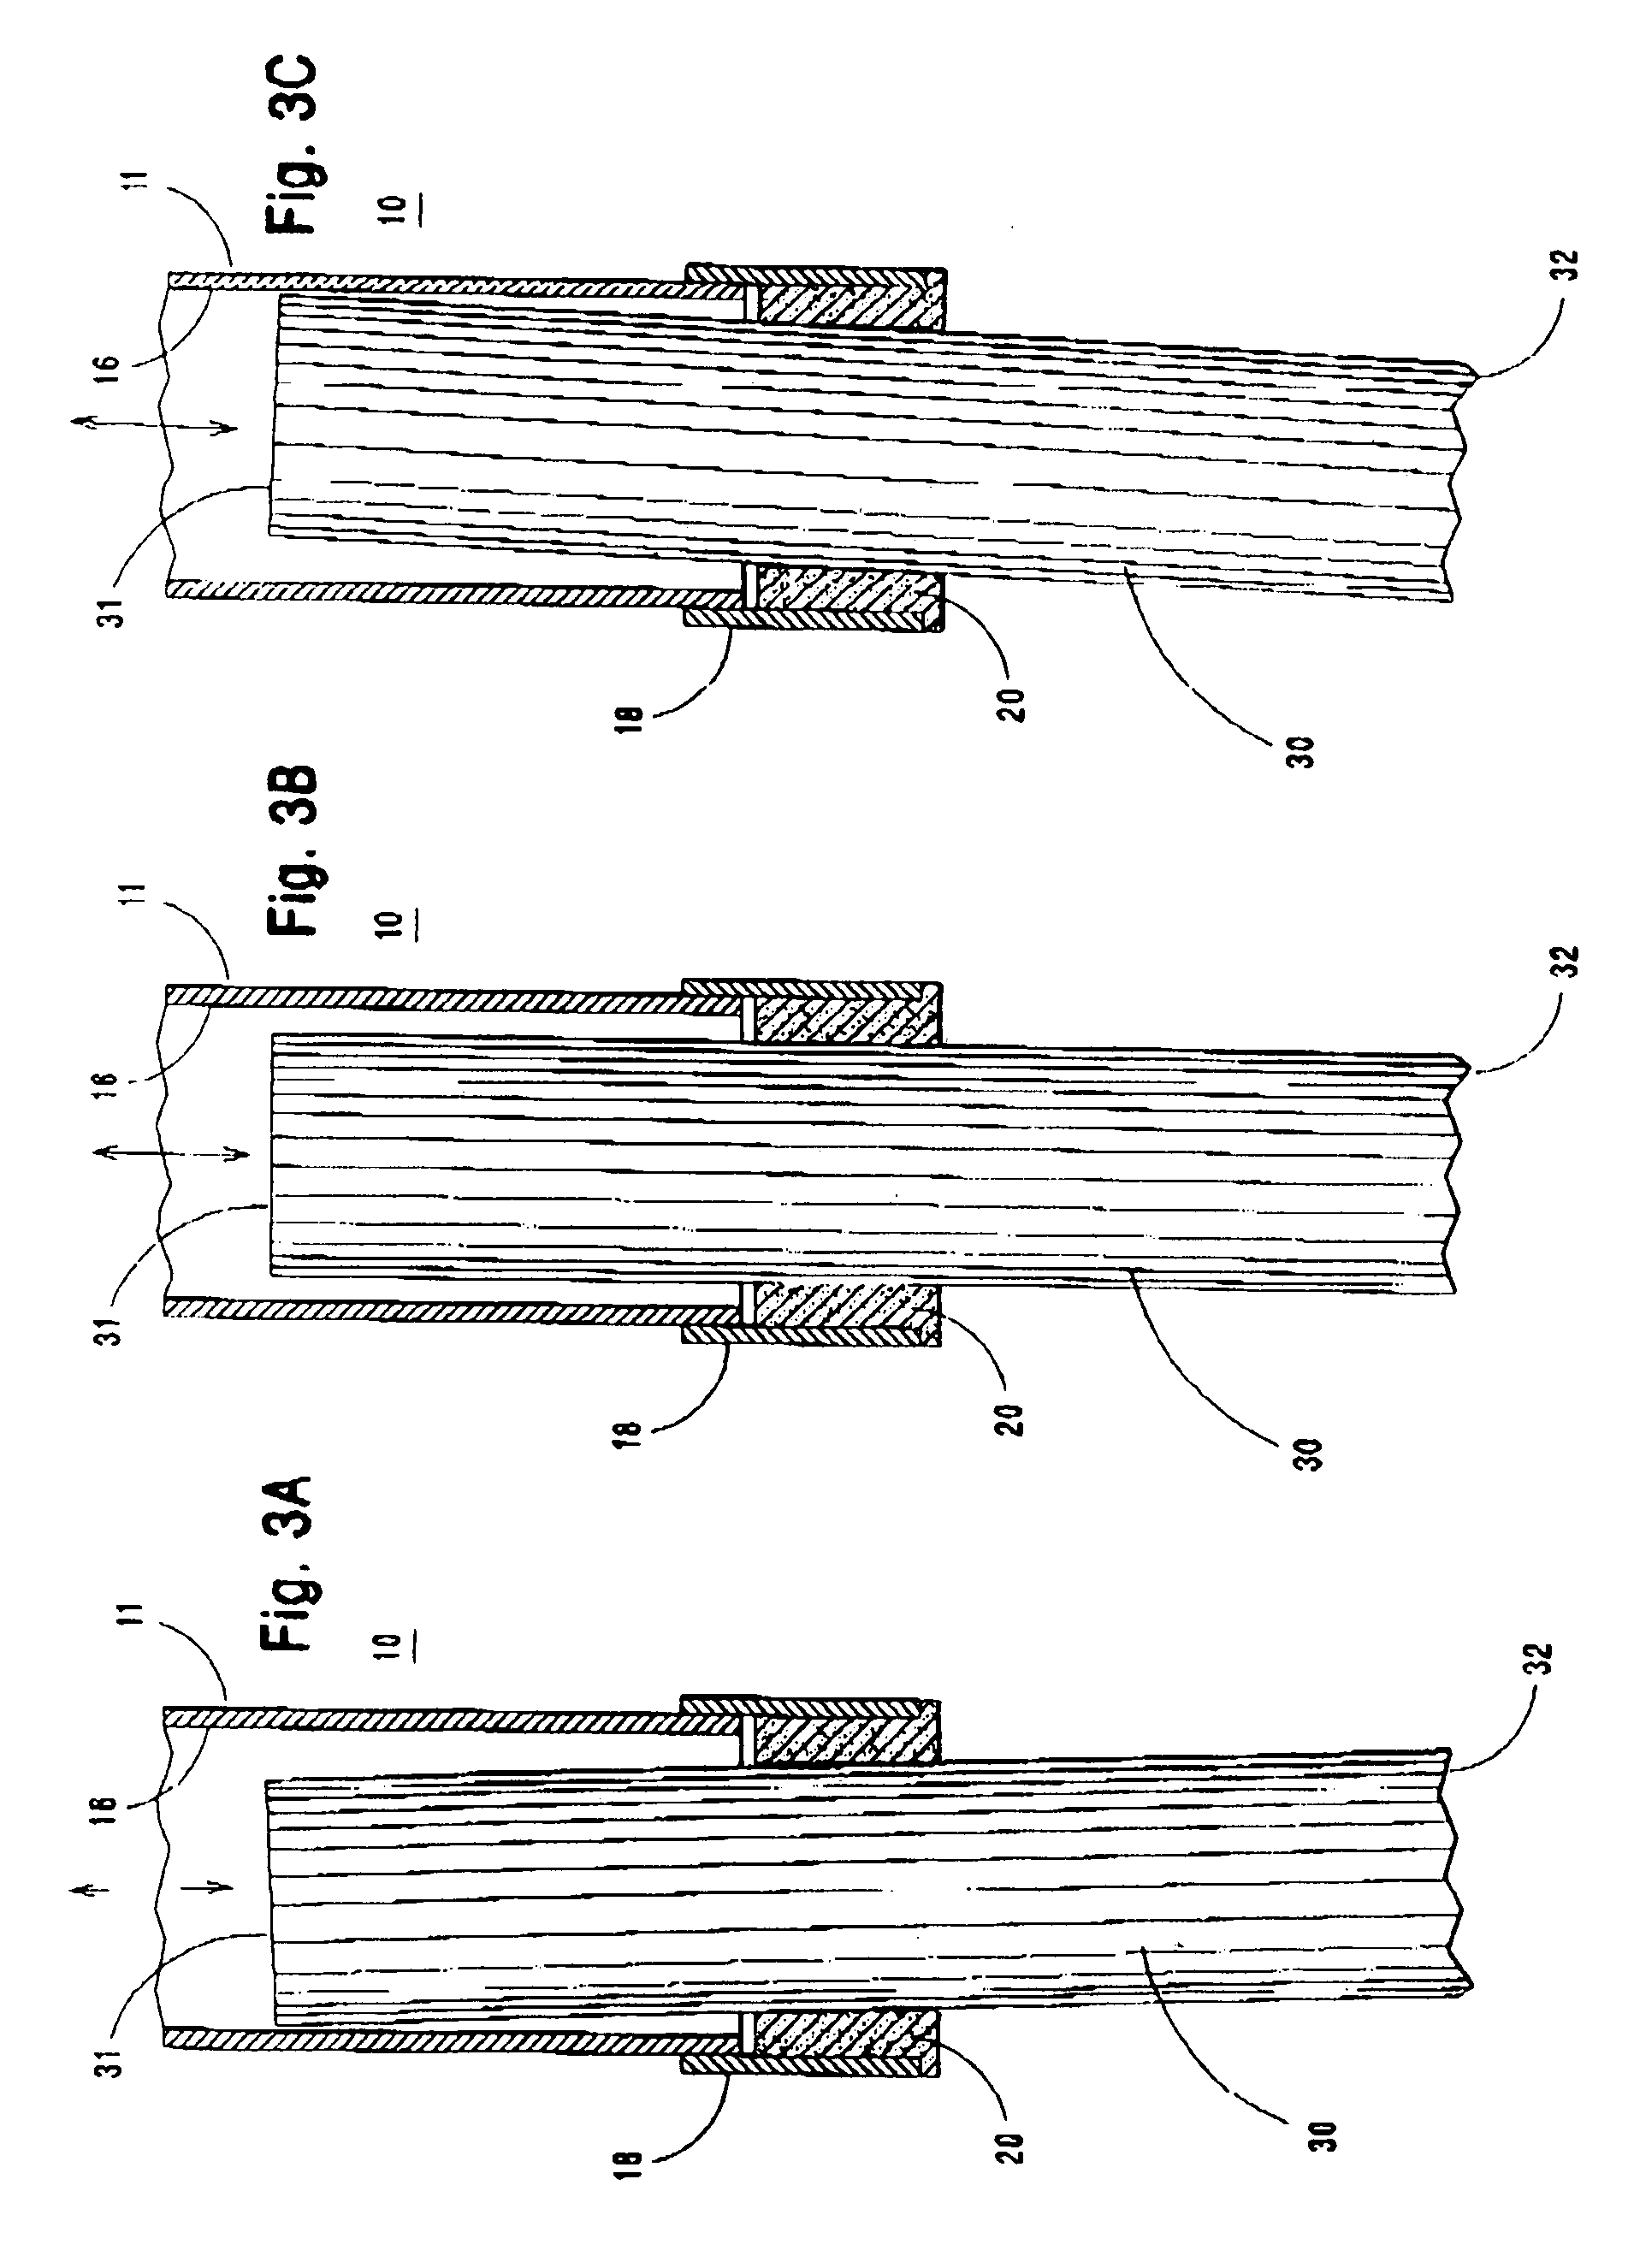 Slip-joint connection for electric service conduit to service boxes